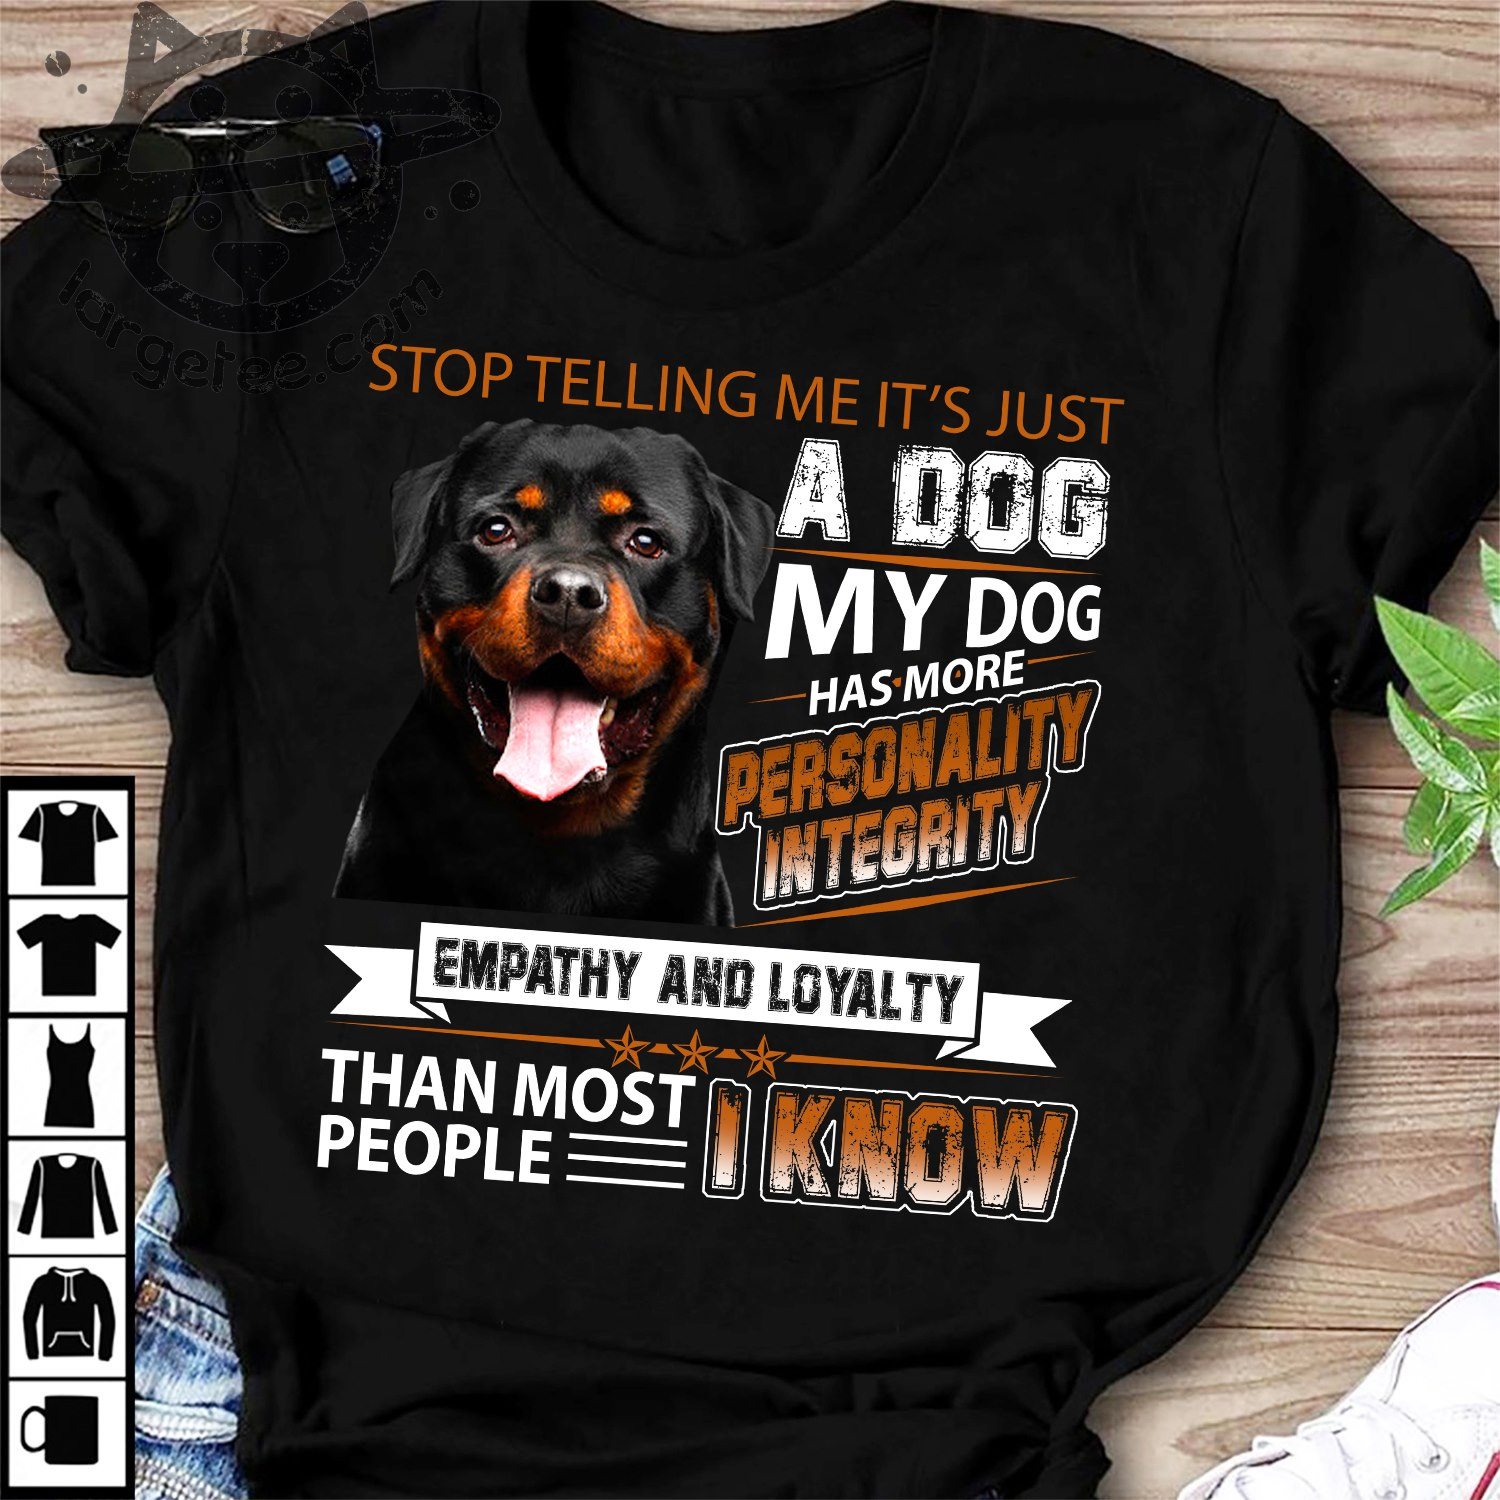 Stop telling me It's just a dog my dog has more personality integrity - Rottweiler dog